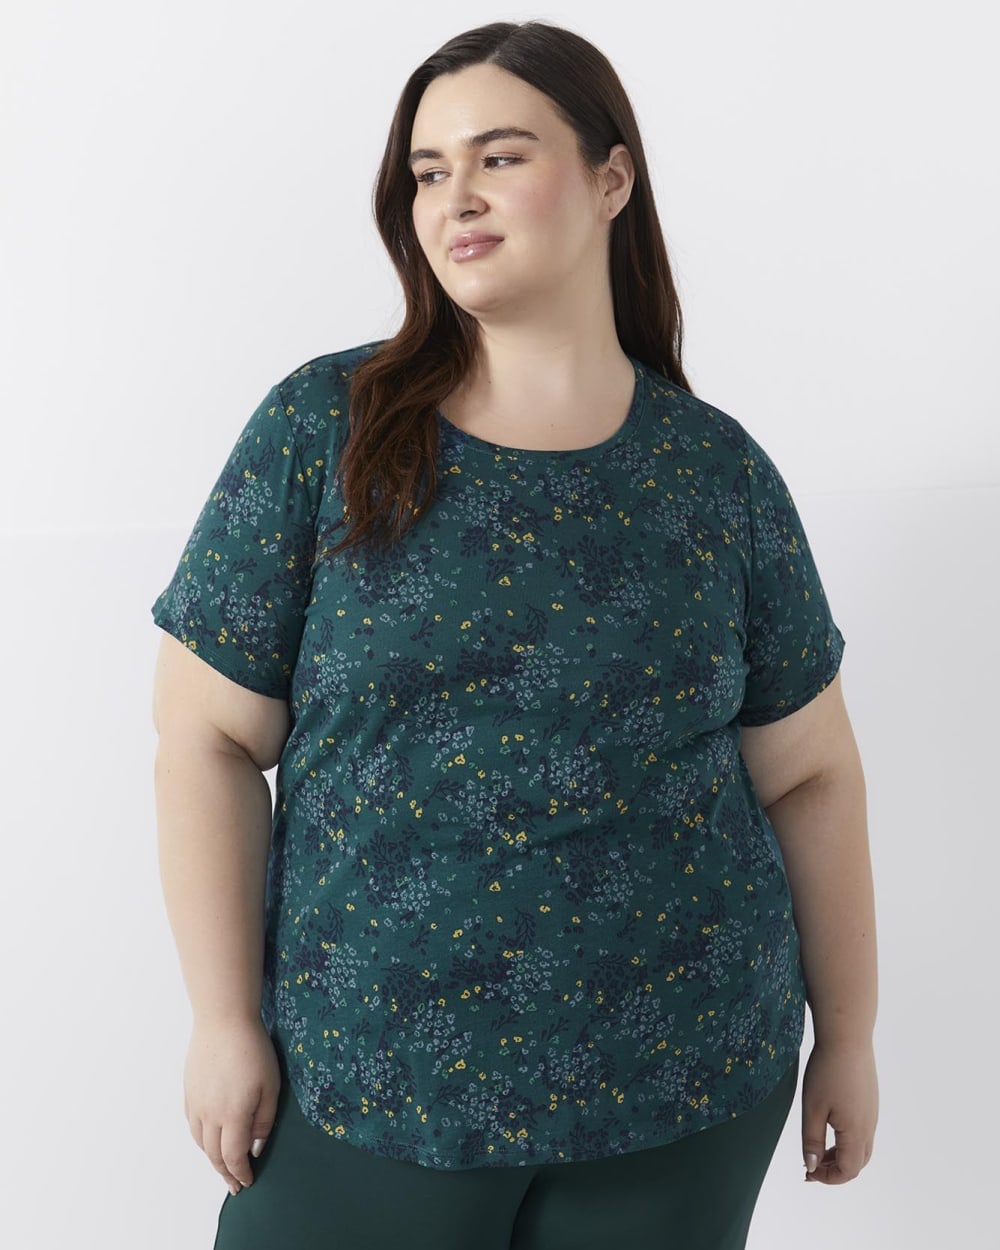 Printed Short-Sleeve Tee with Round Neckline - Active Zone | Penningtons